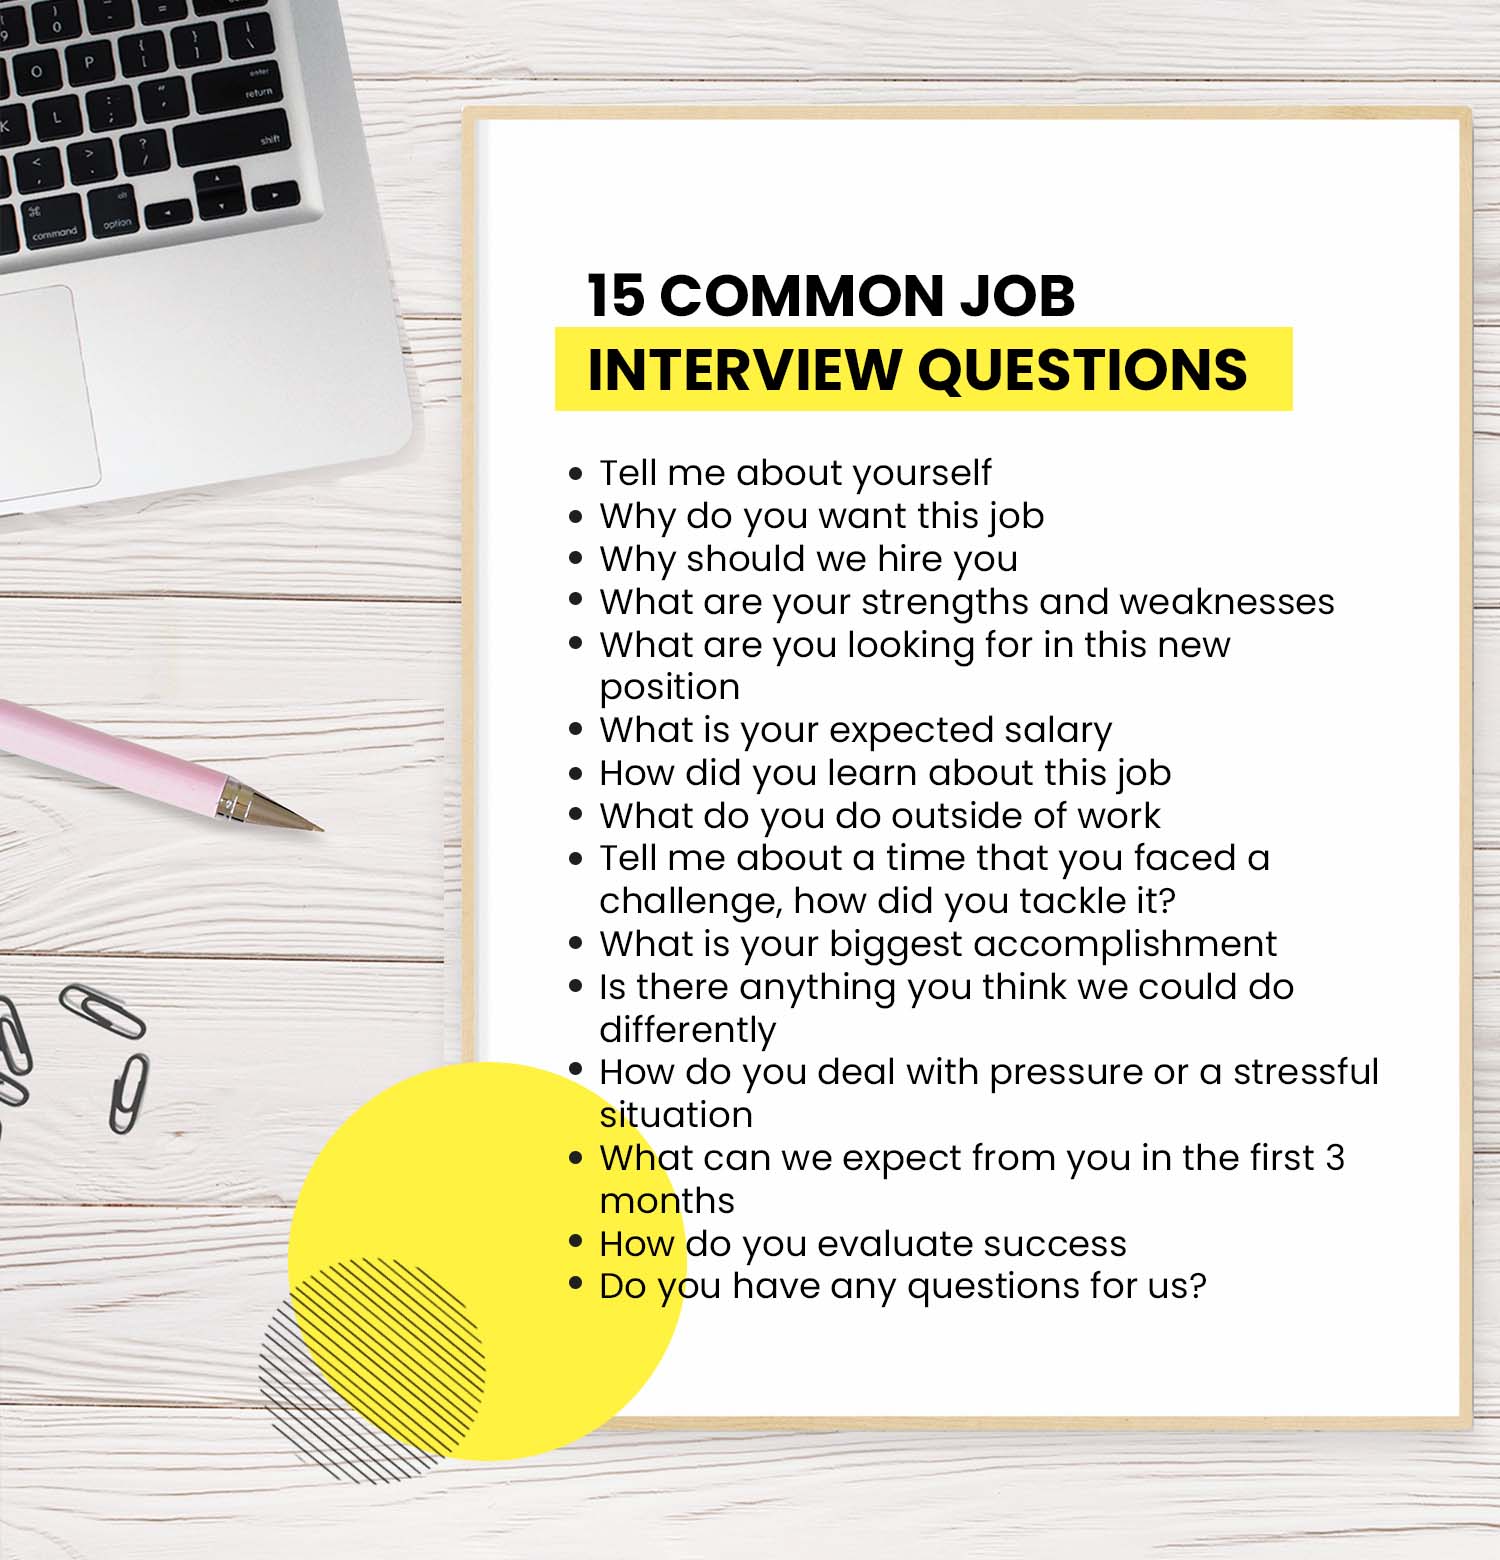 15 common job interview questions you